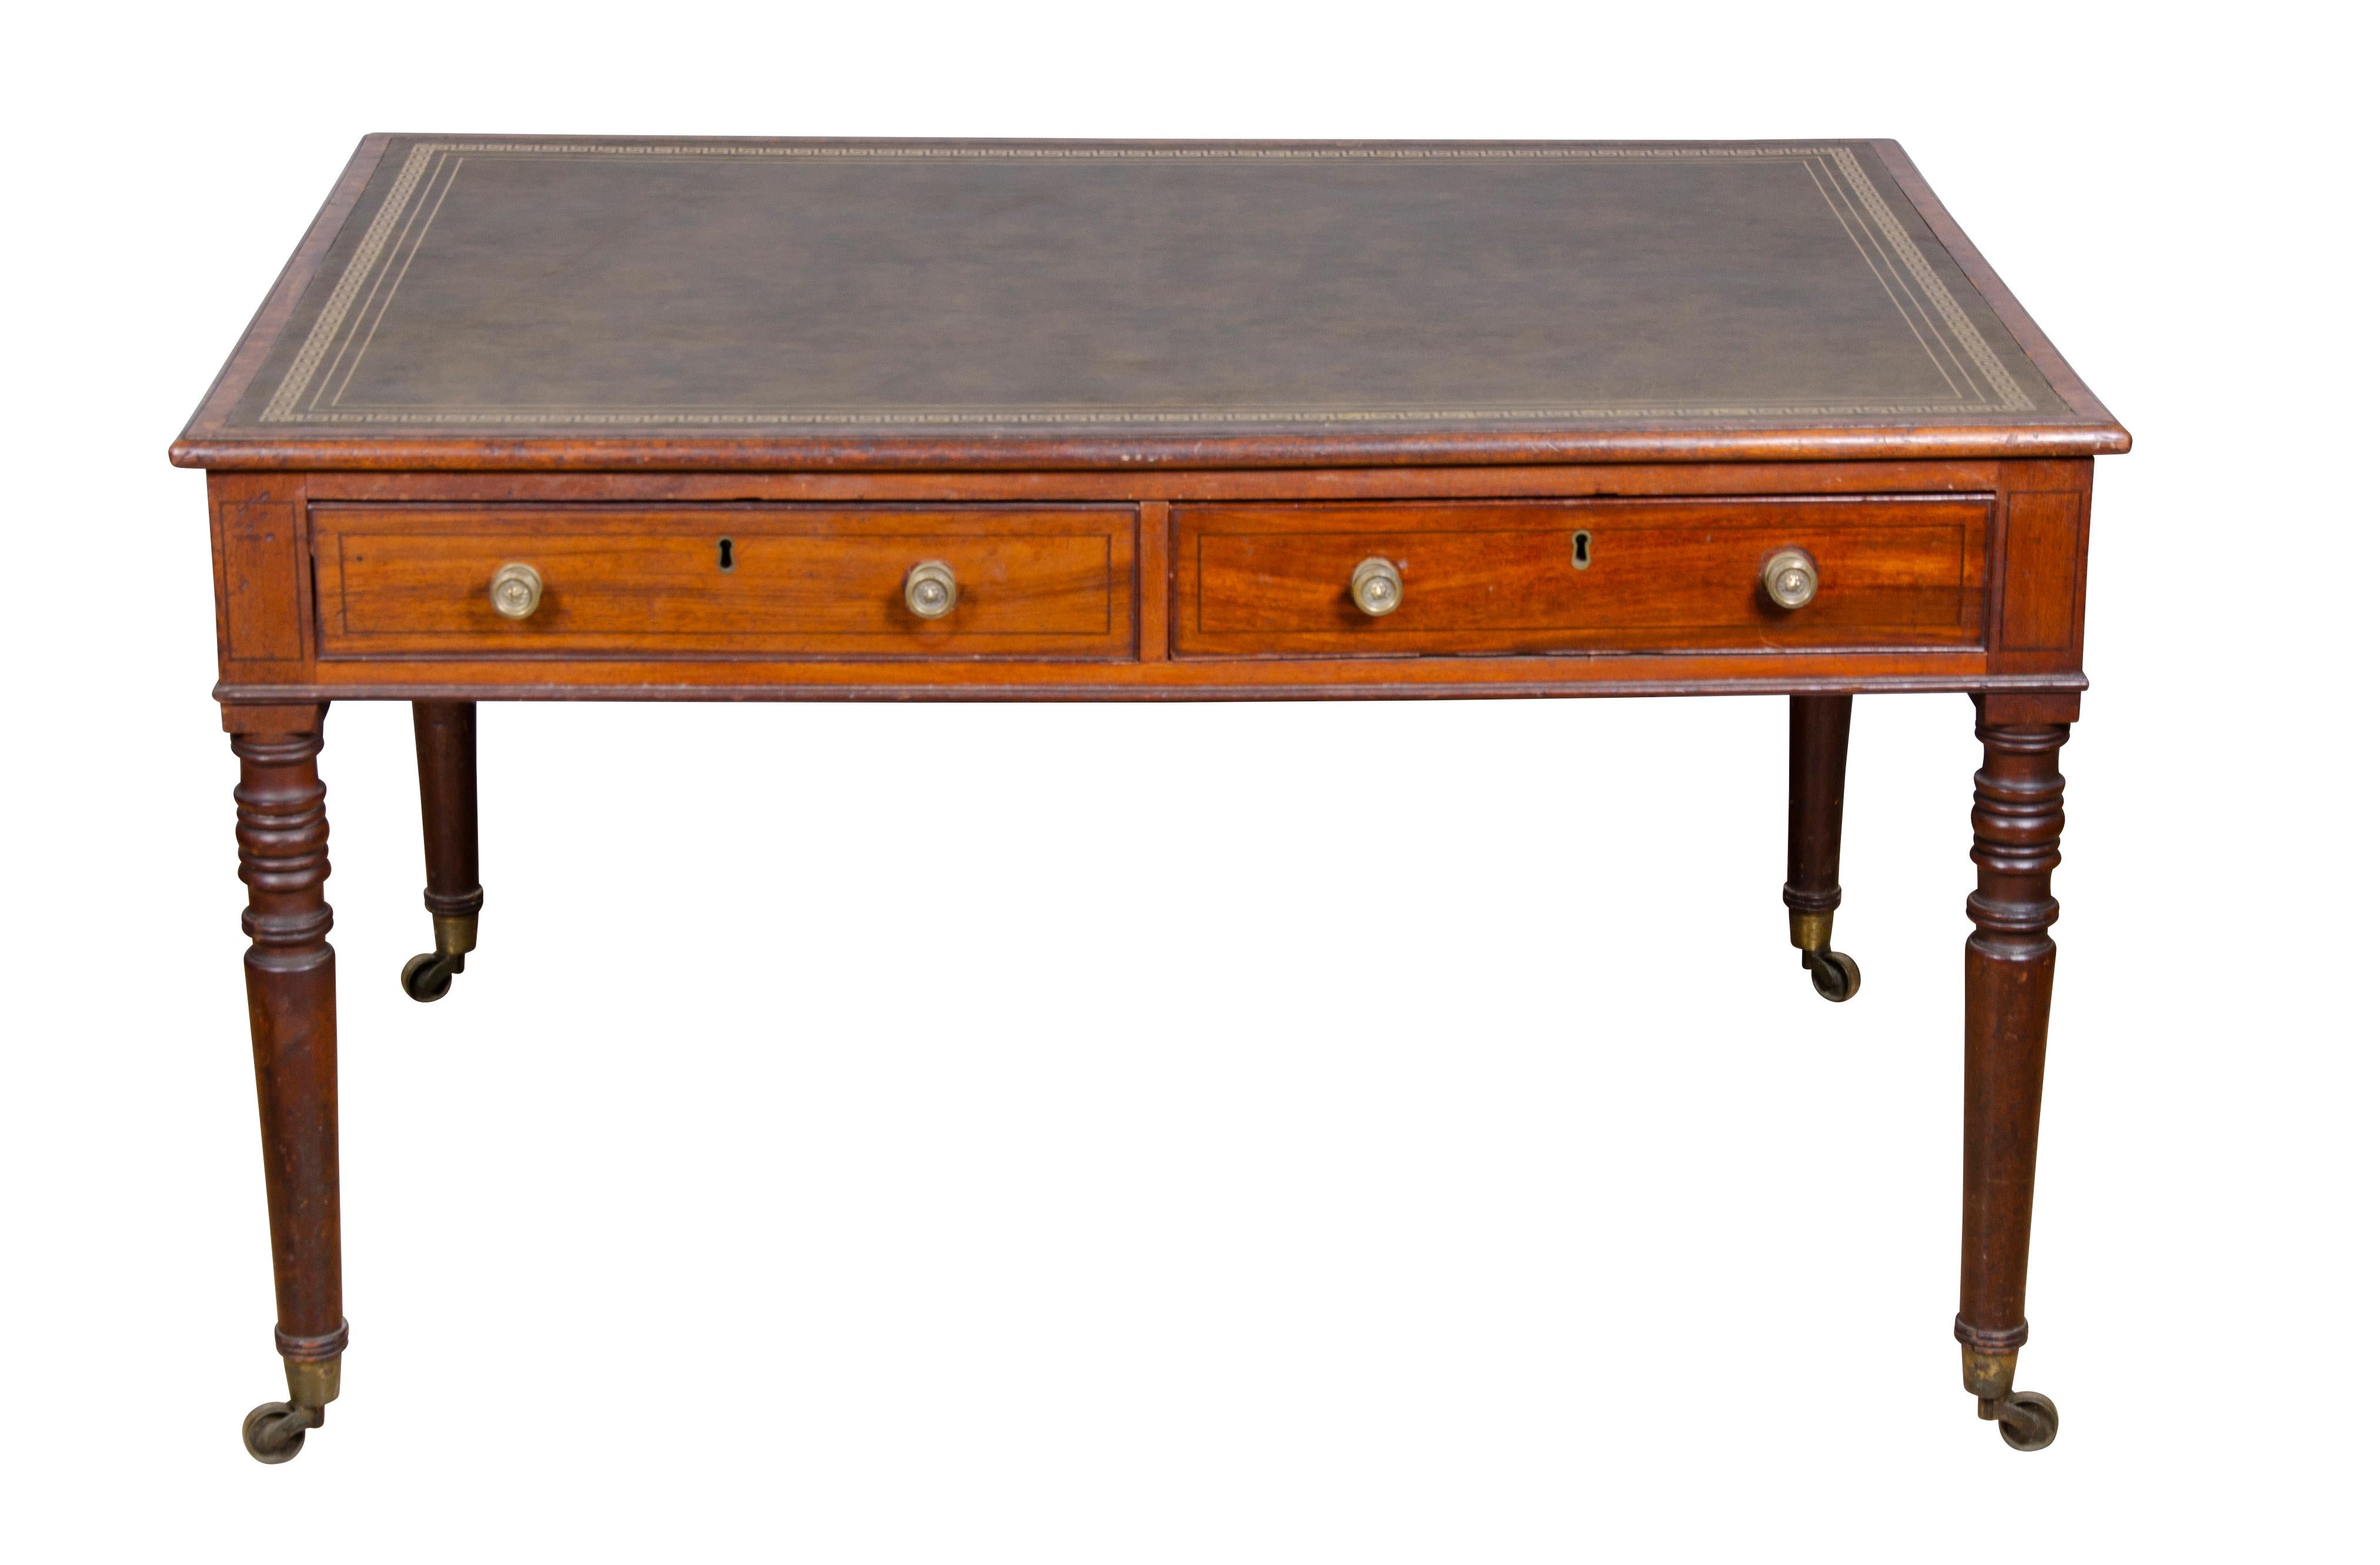 With rectangular top with tooled green leather over two drawers and two opposing drawers with brass knobs, raised on circular tapered legs and casters.